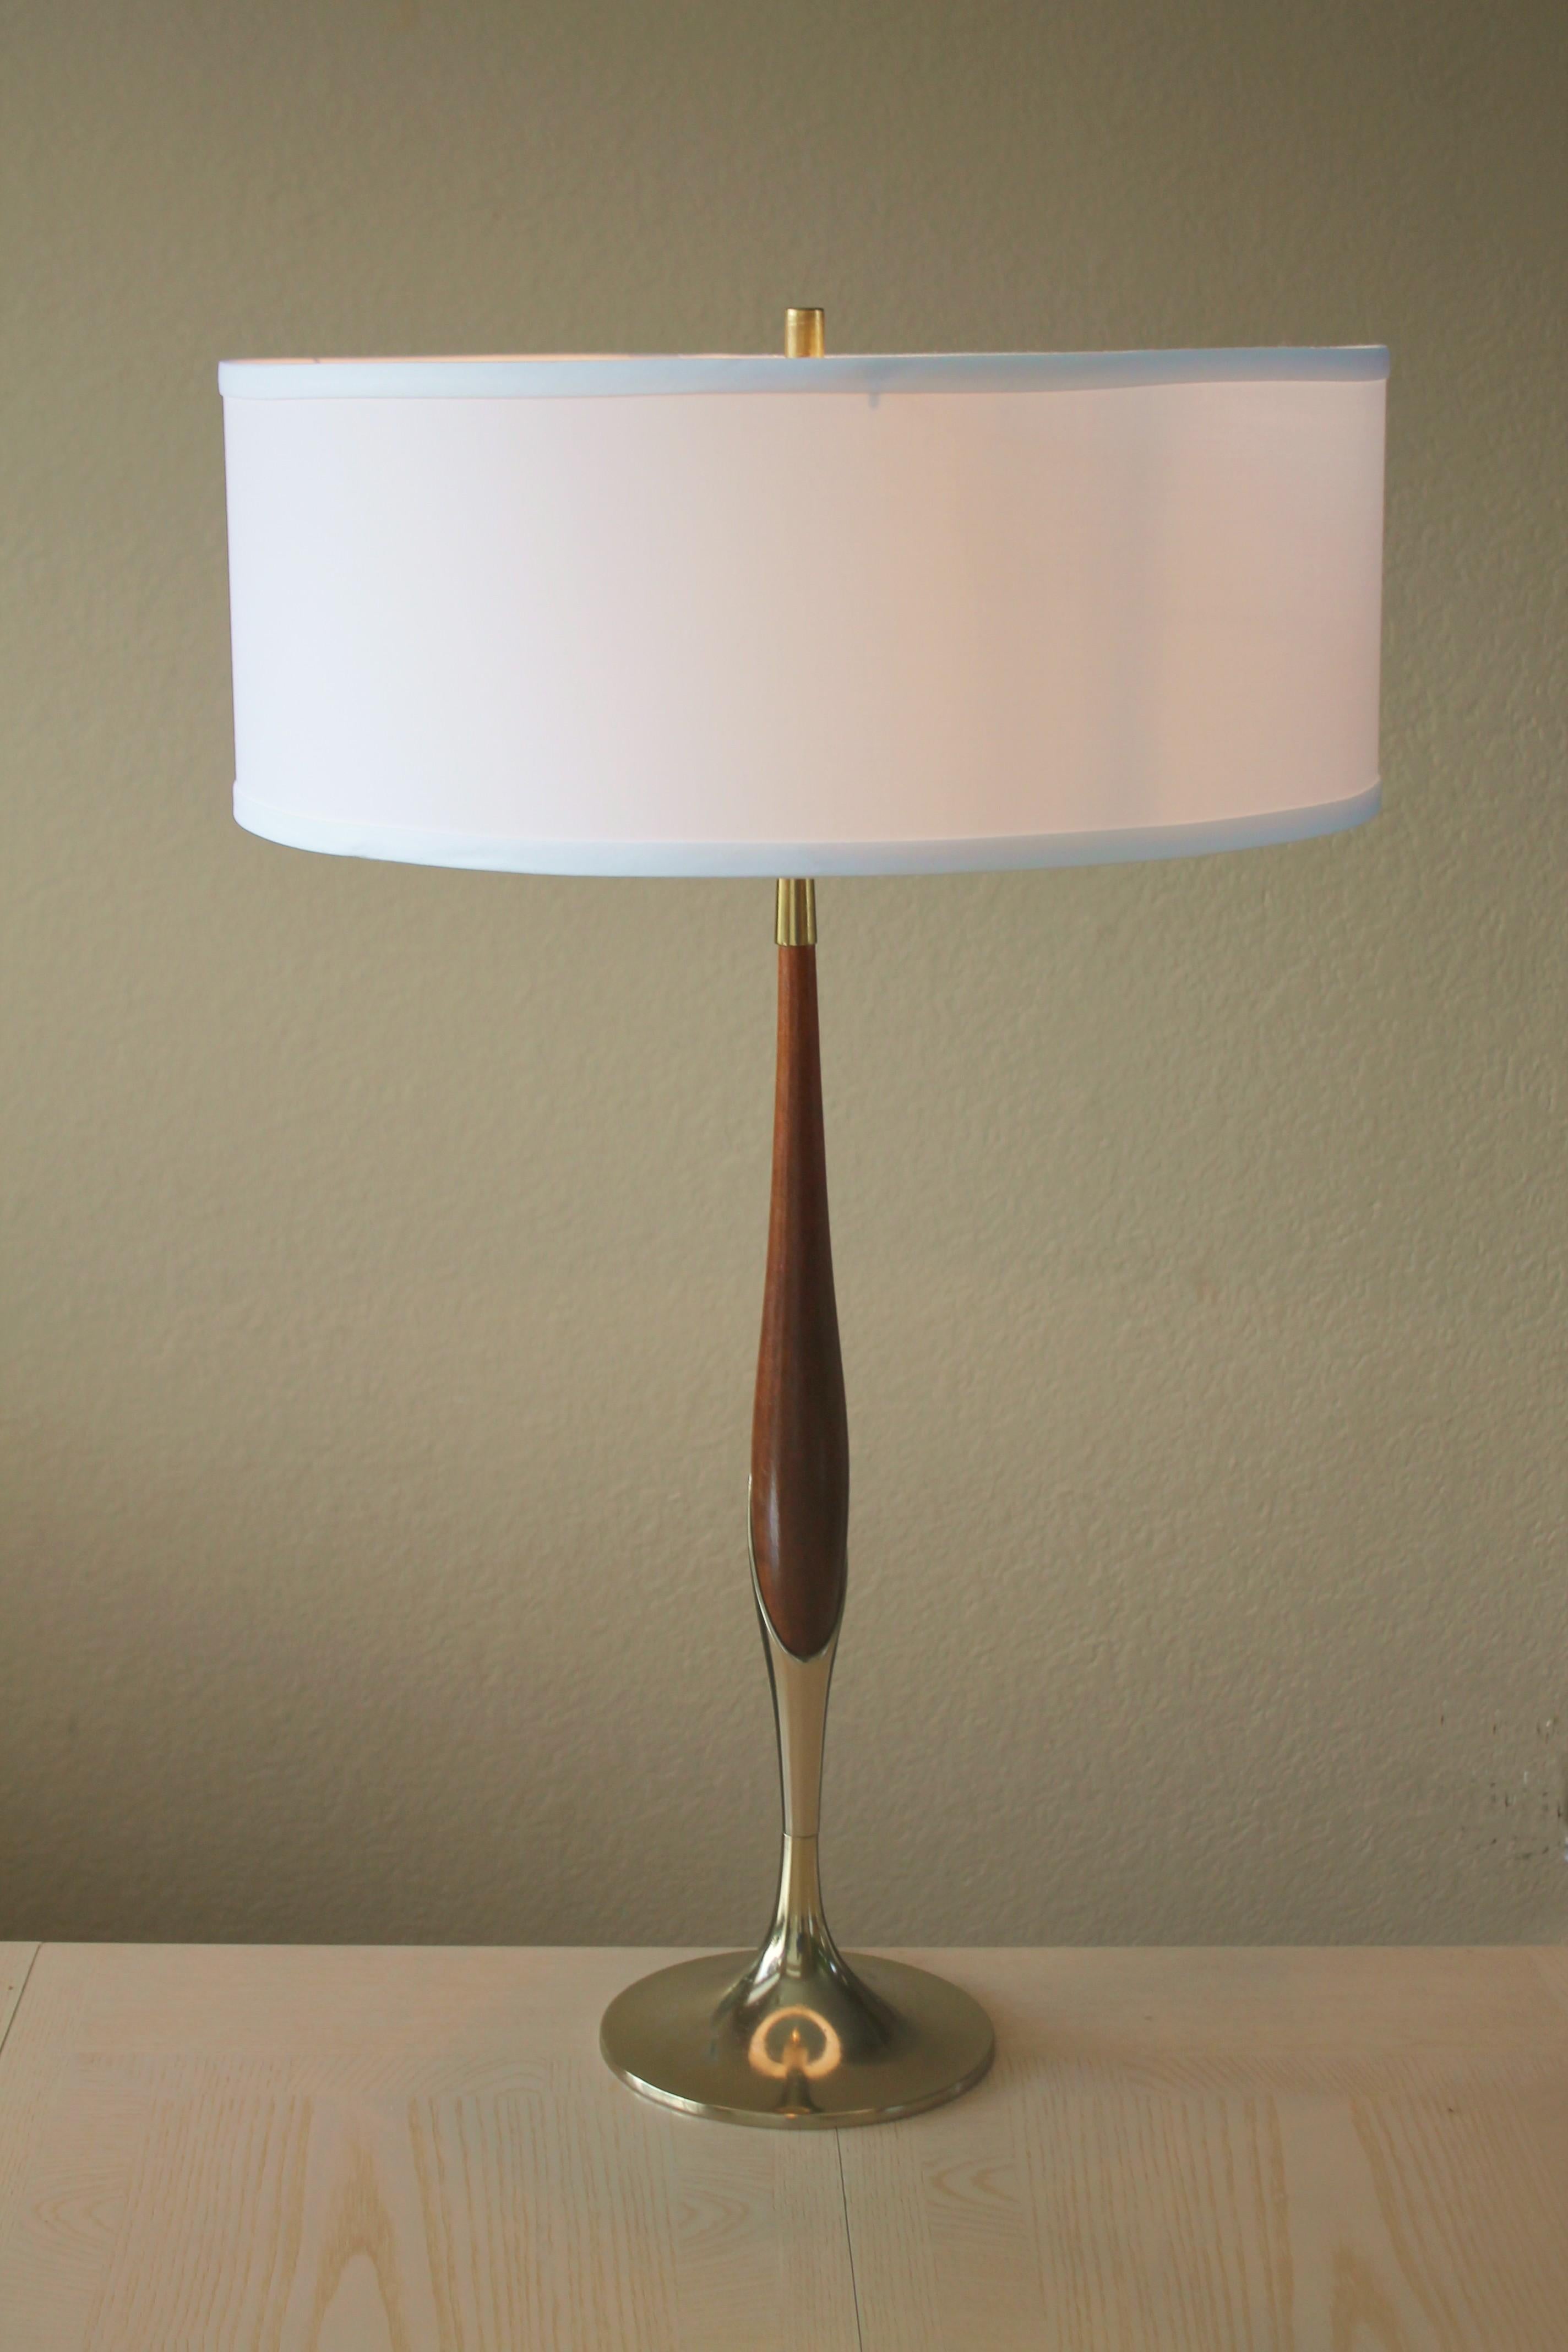 Magnificent!

Brass & Walnut
Mid Century Modern
Table Lamp
By Laurel Lamp Company

Circa 1957

Attributed to Designer Richard Barr

Wow! This is an incredible example of the iconic Mid century Walnut & Brass table lamp with a tulip inspired